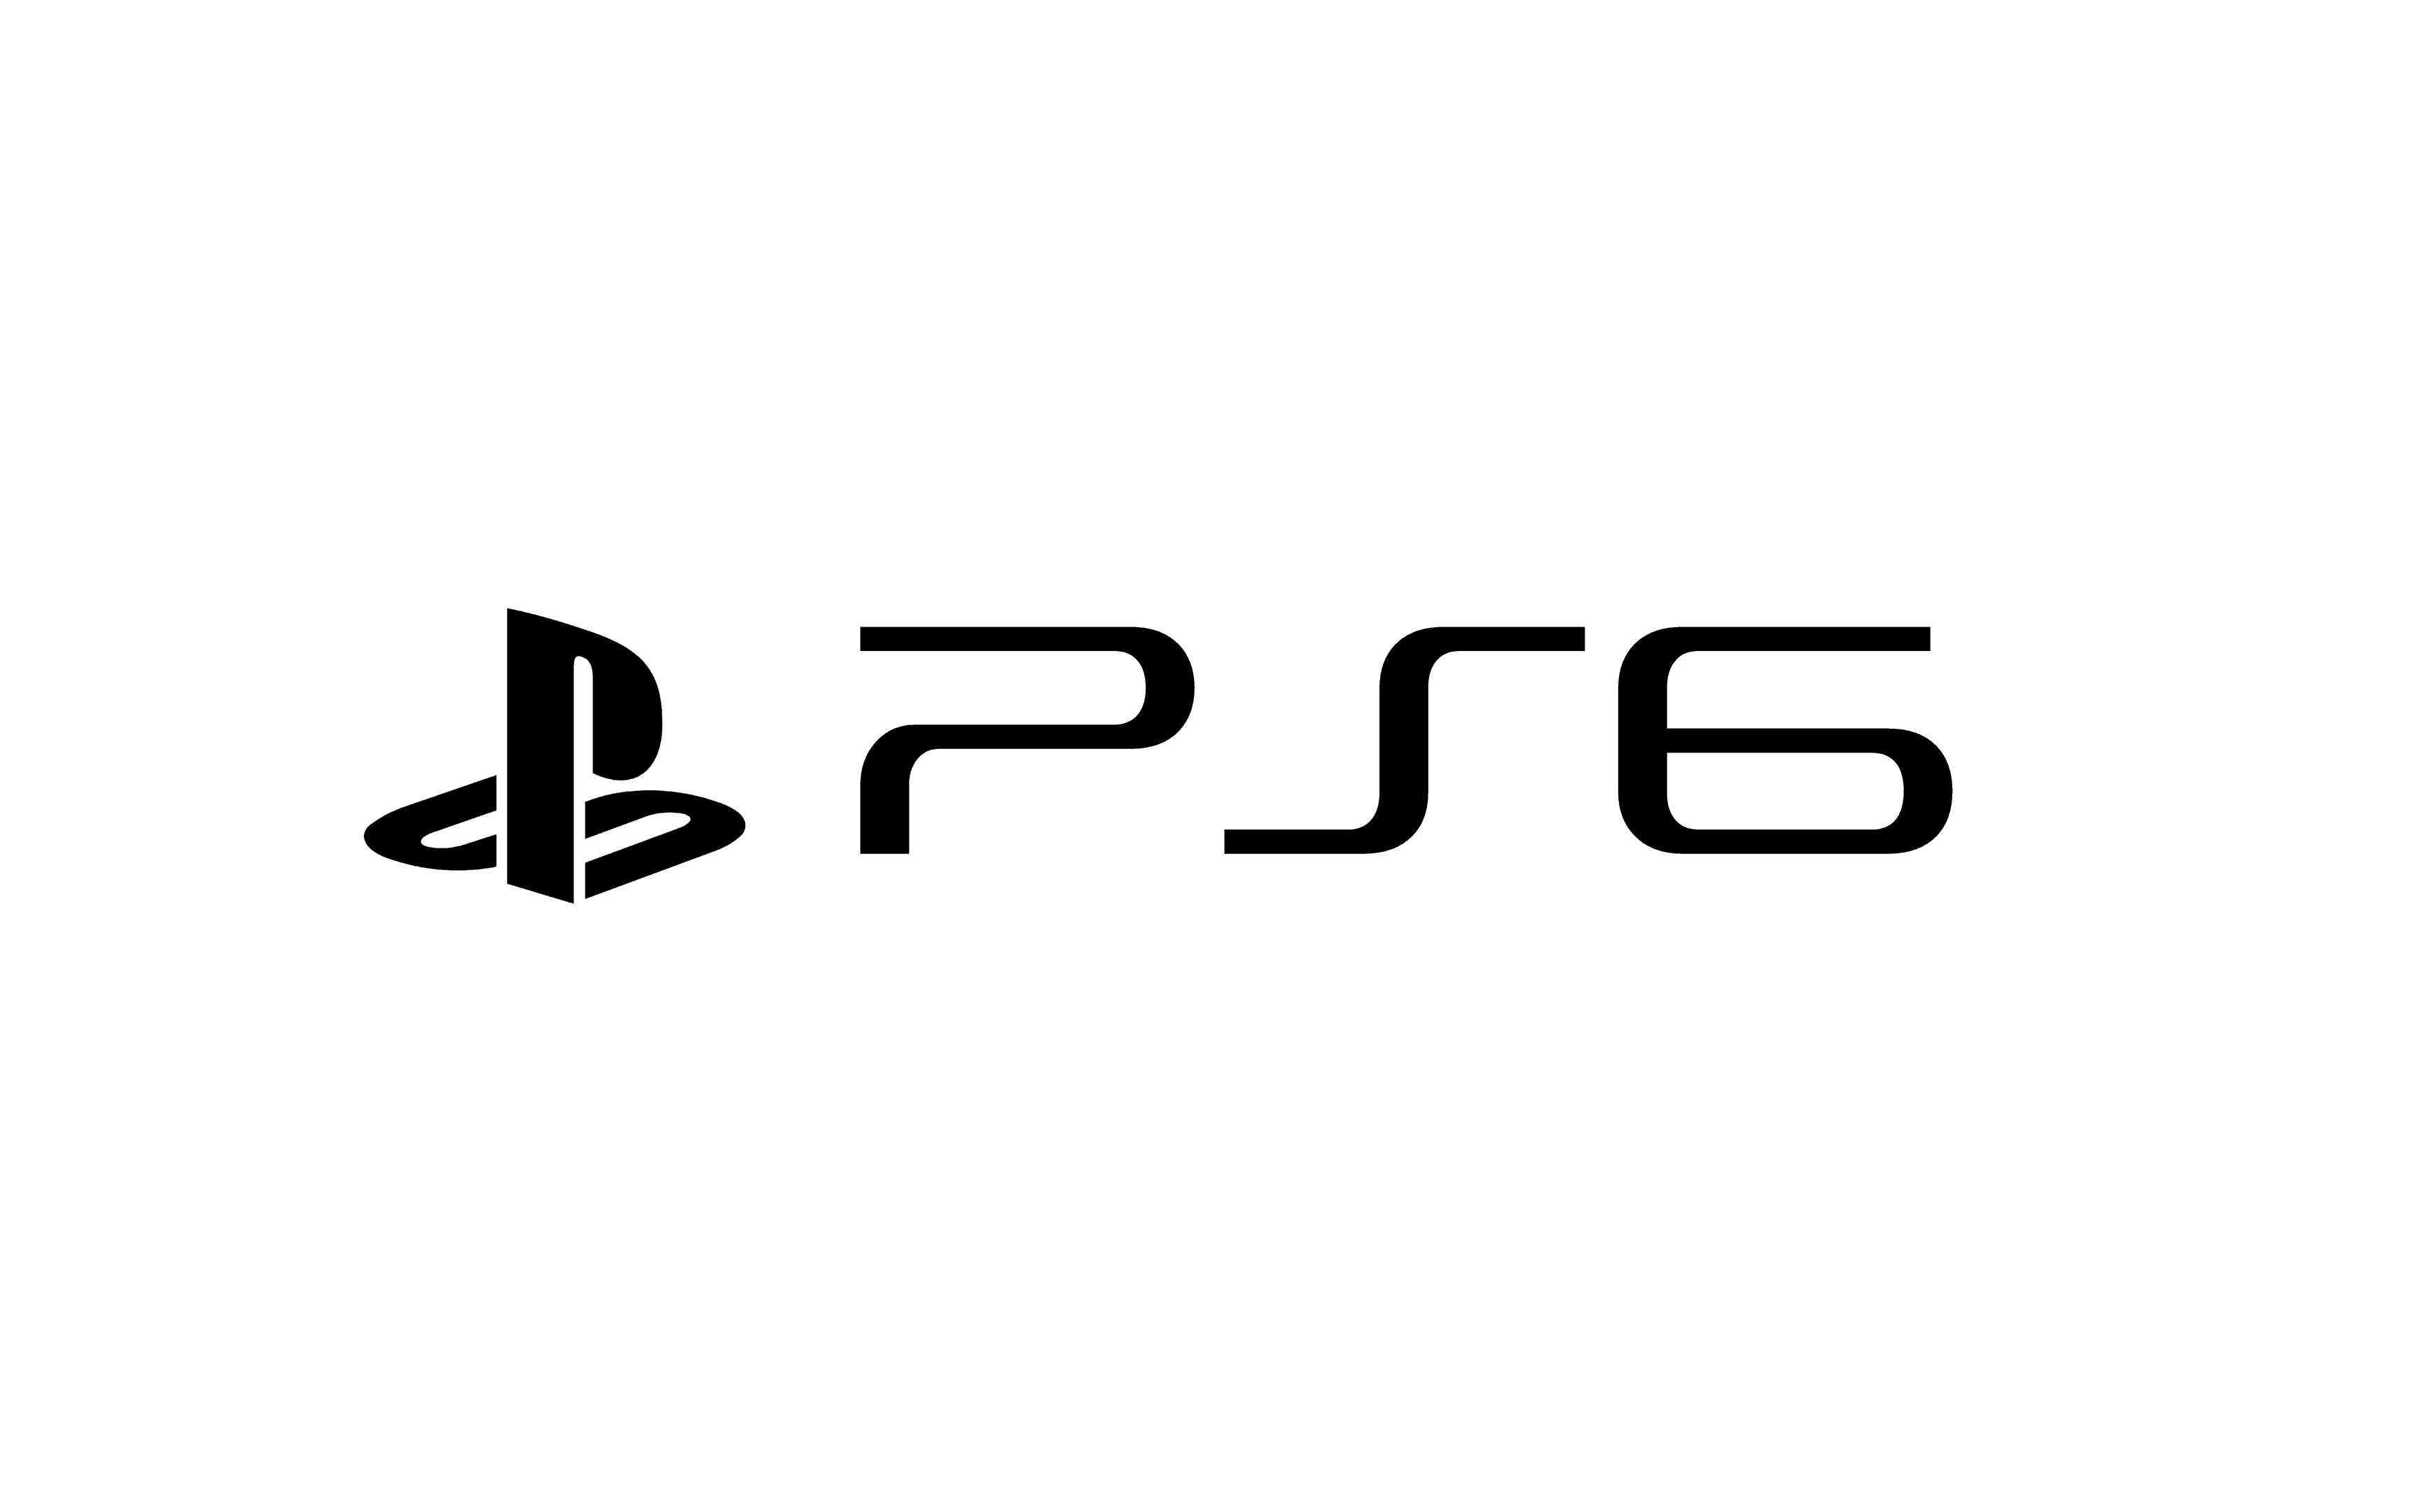 Everything you need to know about PS6 - Core Gaming